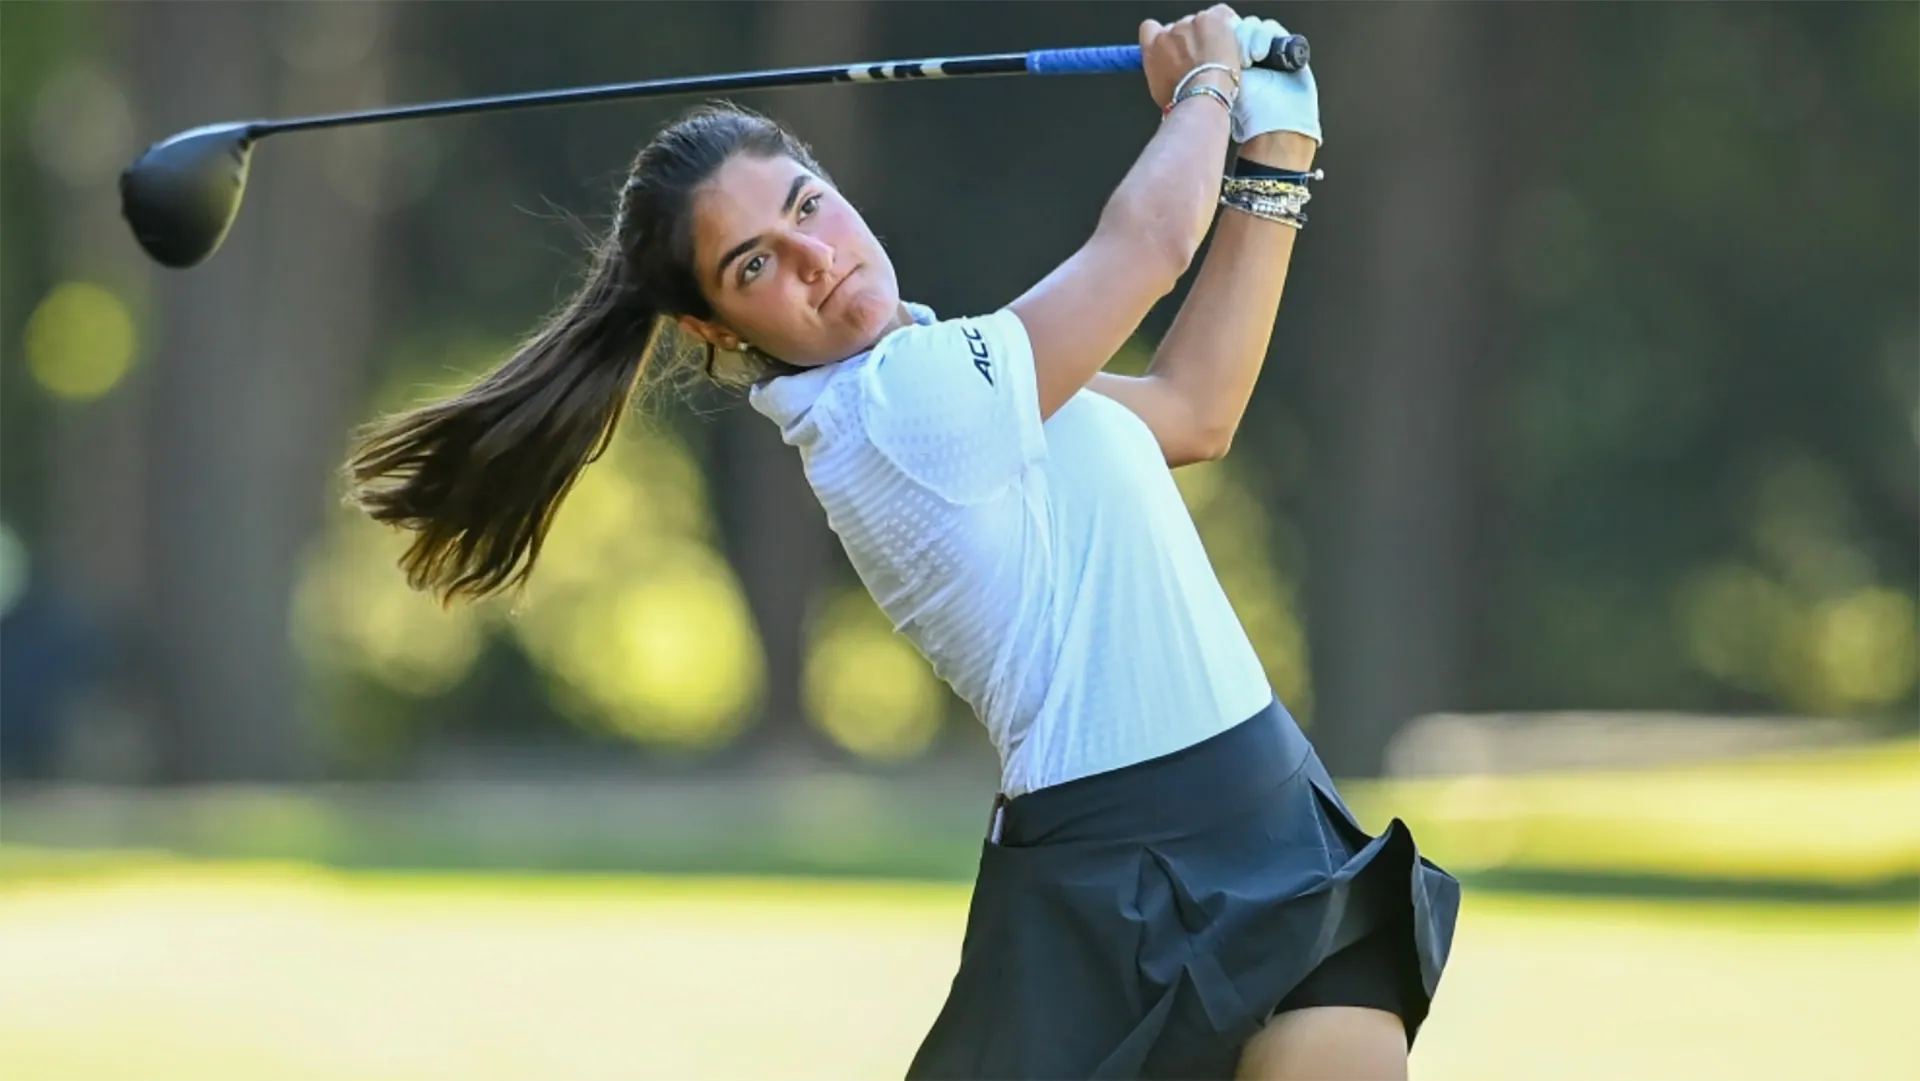 Carolina Lopez-Chacarra dealing with wrist issue on eve of Augusta National Women’s Amateur